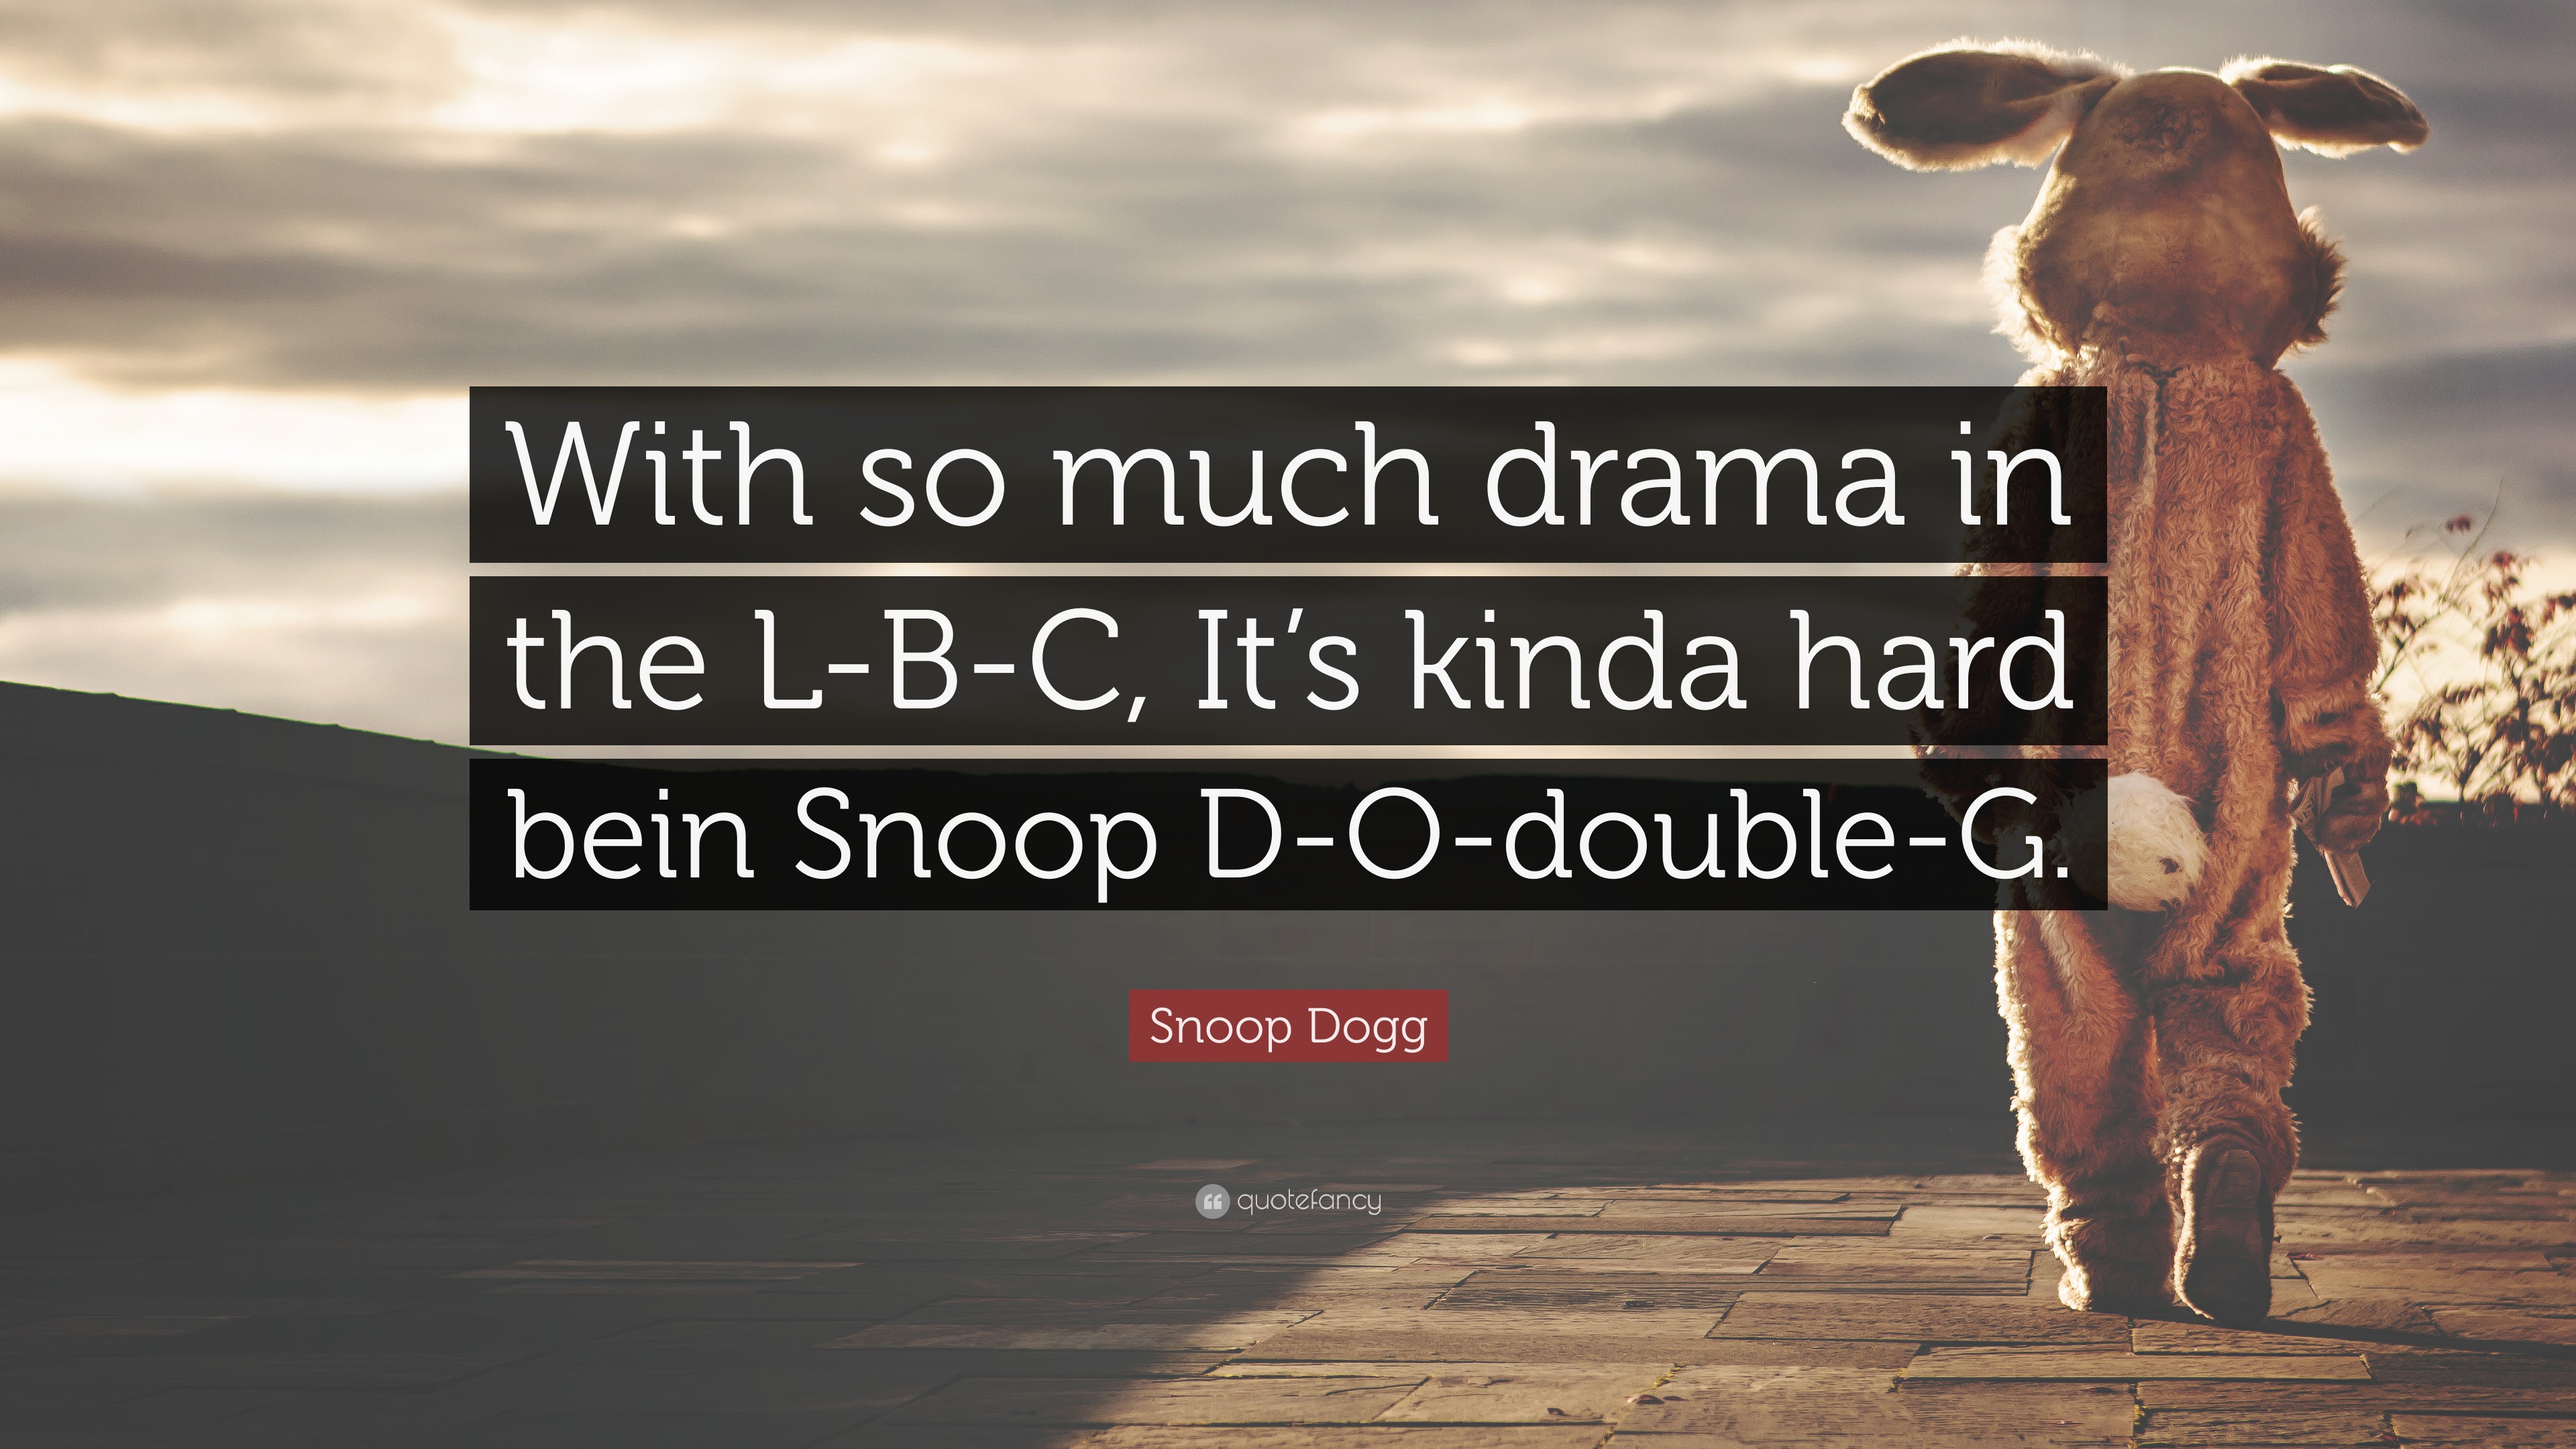 Snoop Dogg Quote: “With in the L-B-C, It's kinda hard Snoop D-O-